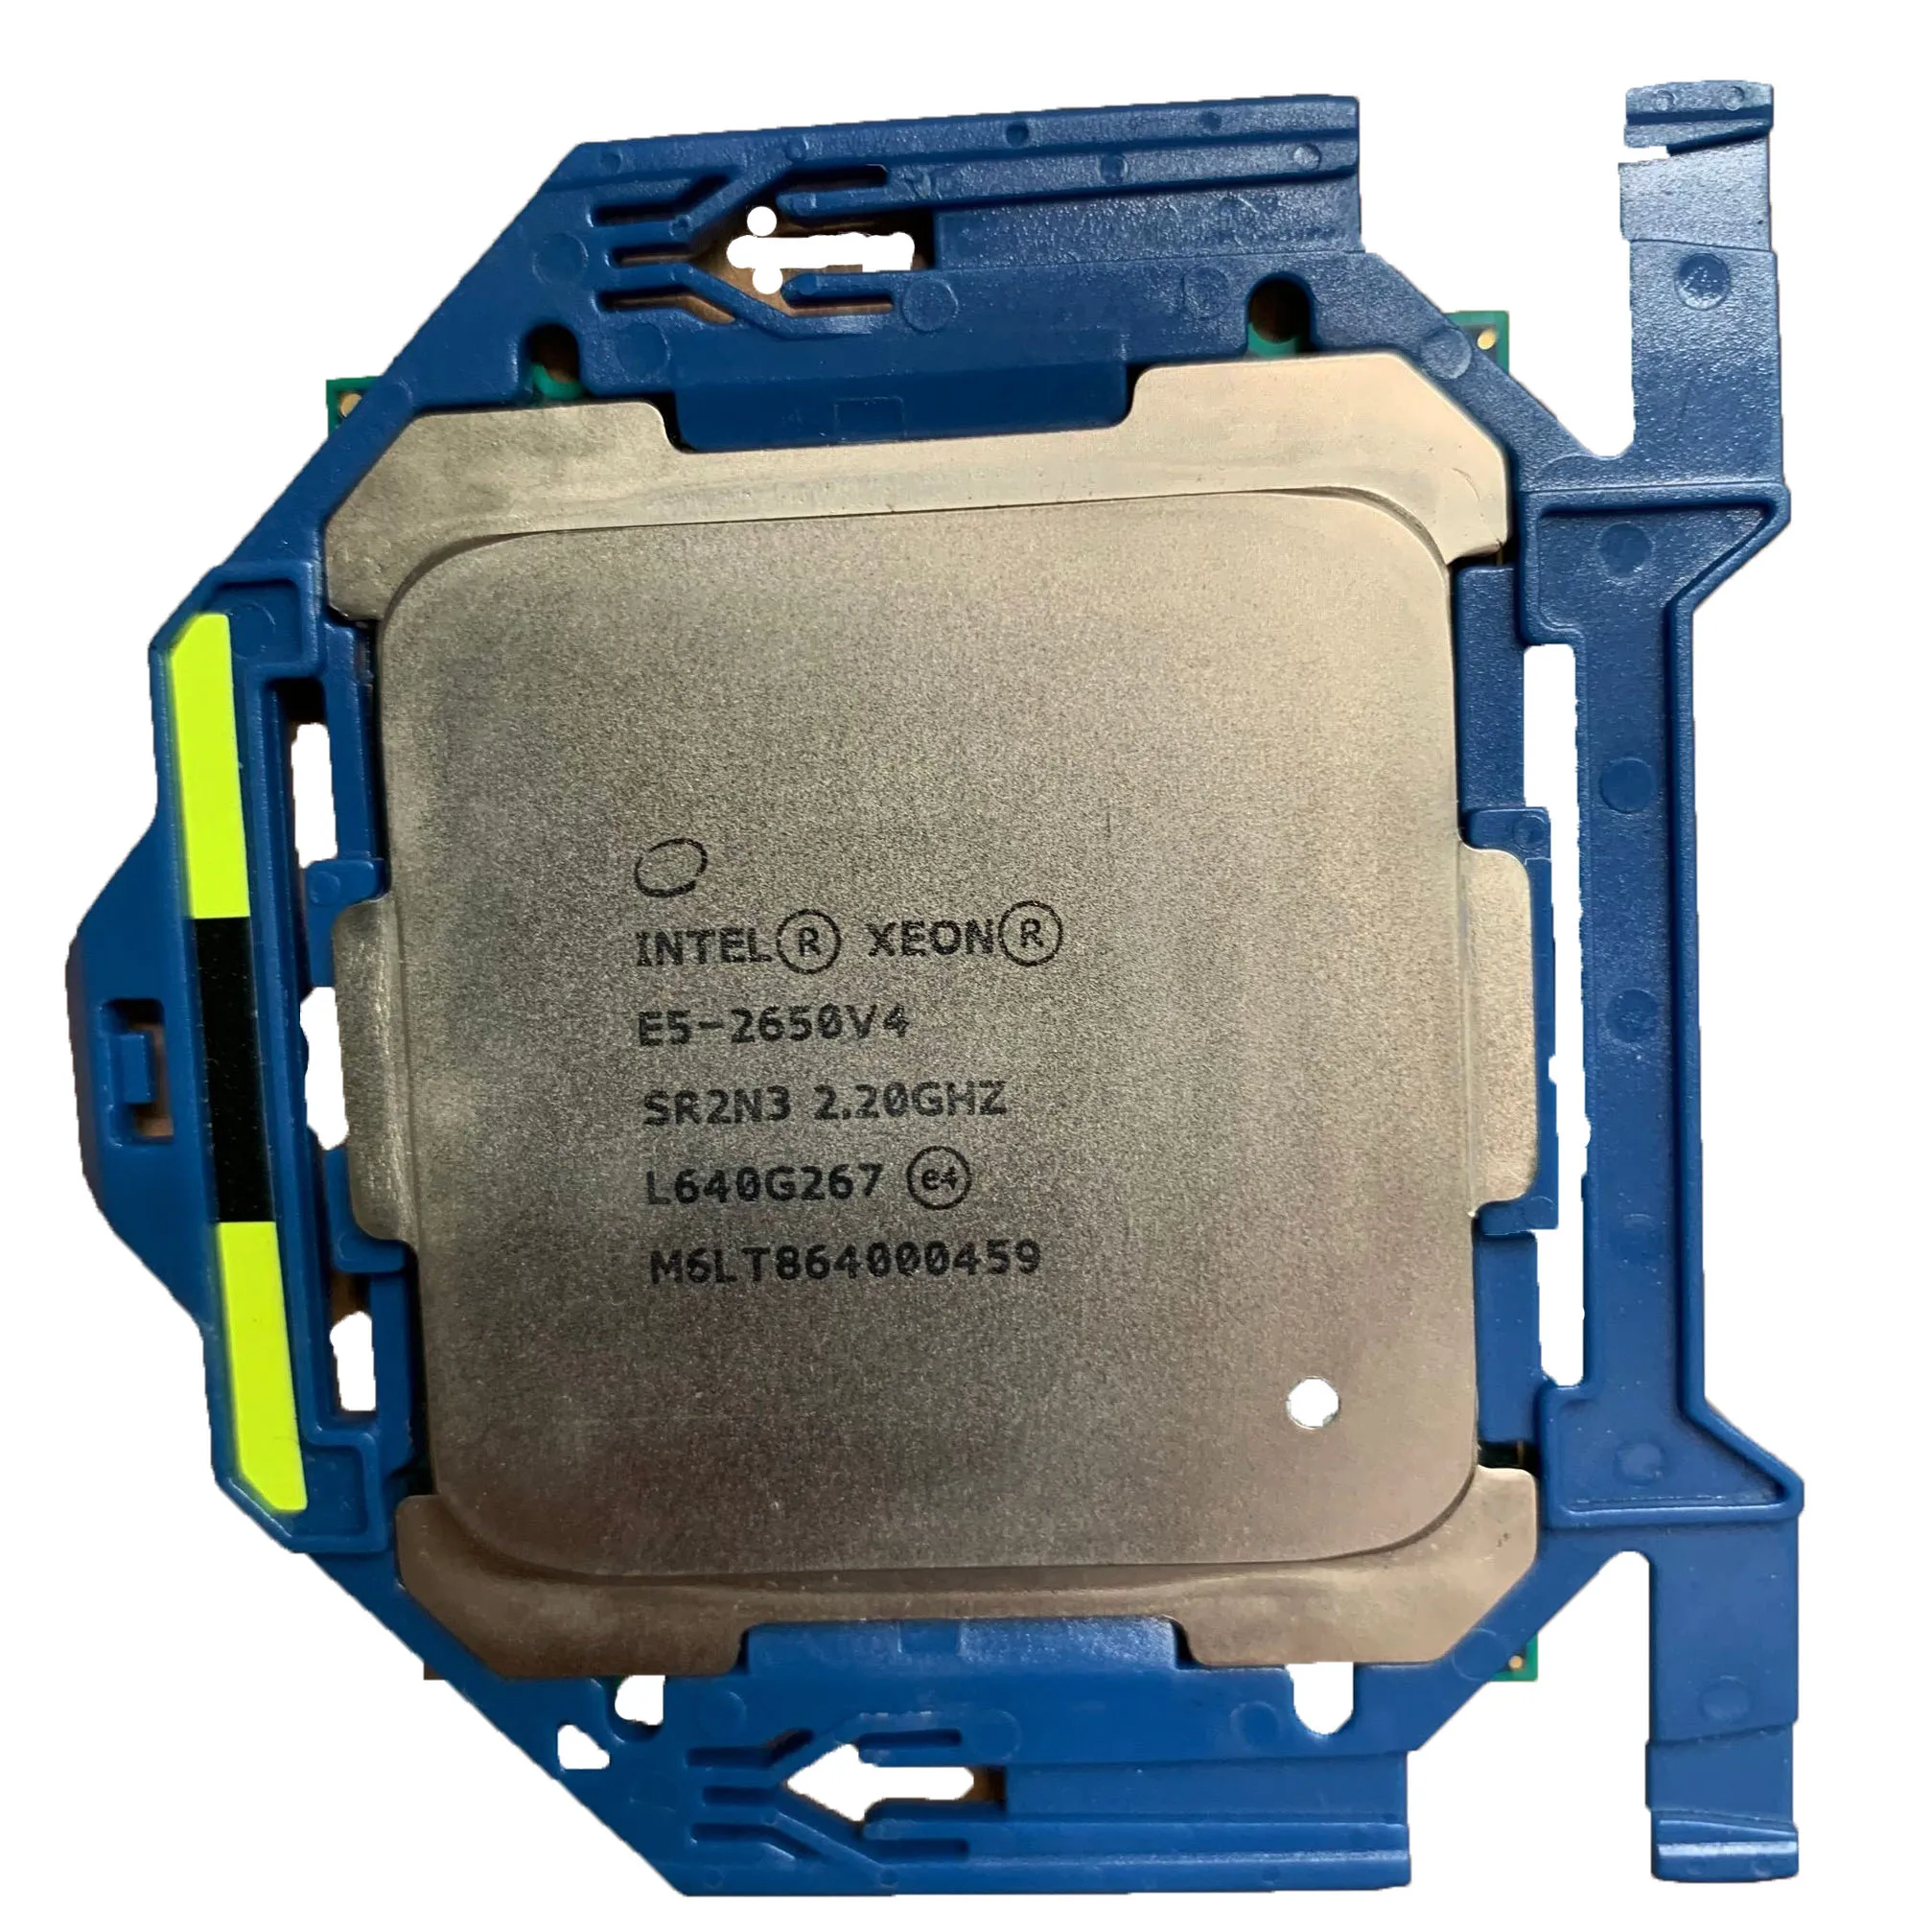 

Wholesale Xeon 5218 Top Sale Good Quality 2.3GHz Xeon Gold 5218 SRGZL Central Processing Unit Cpu Processor